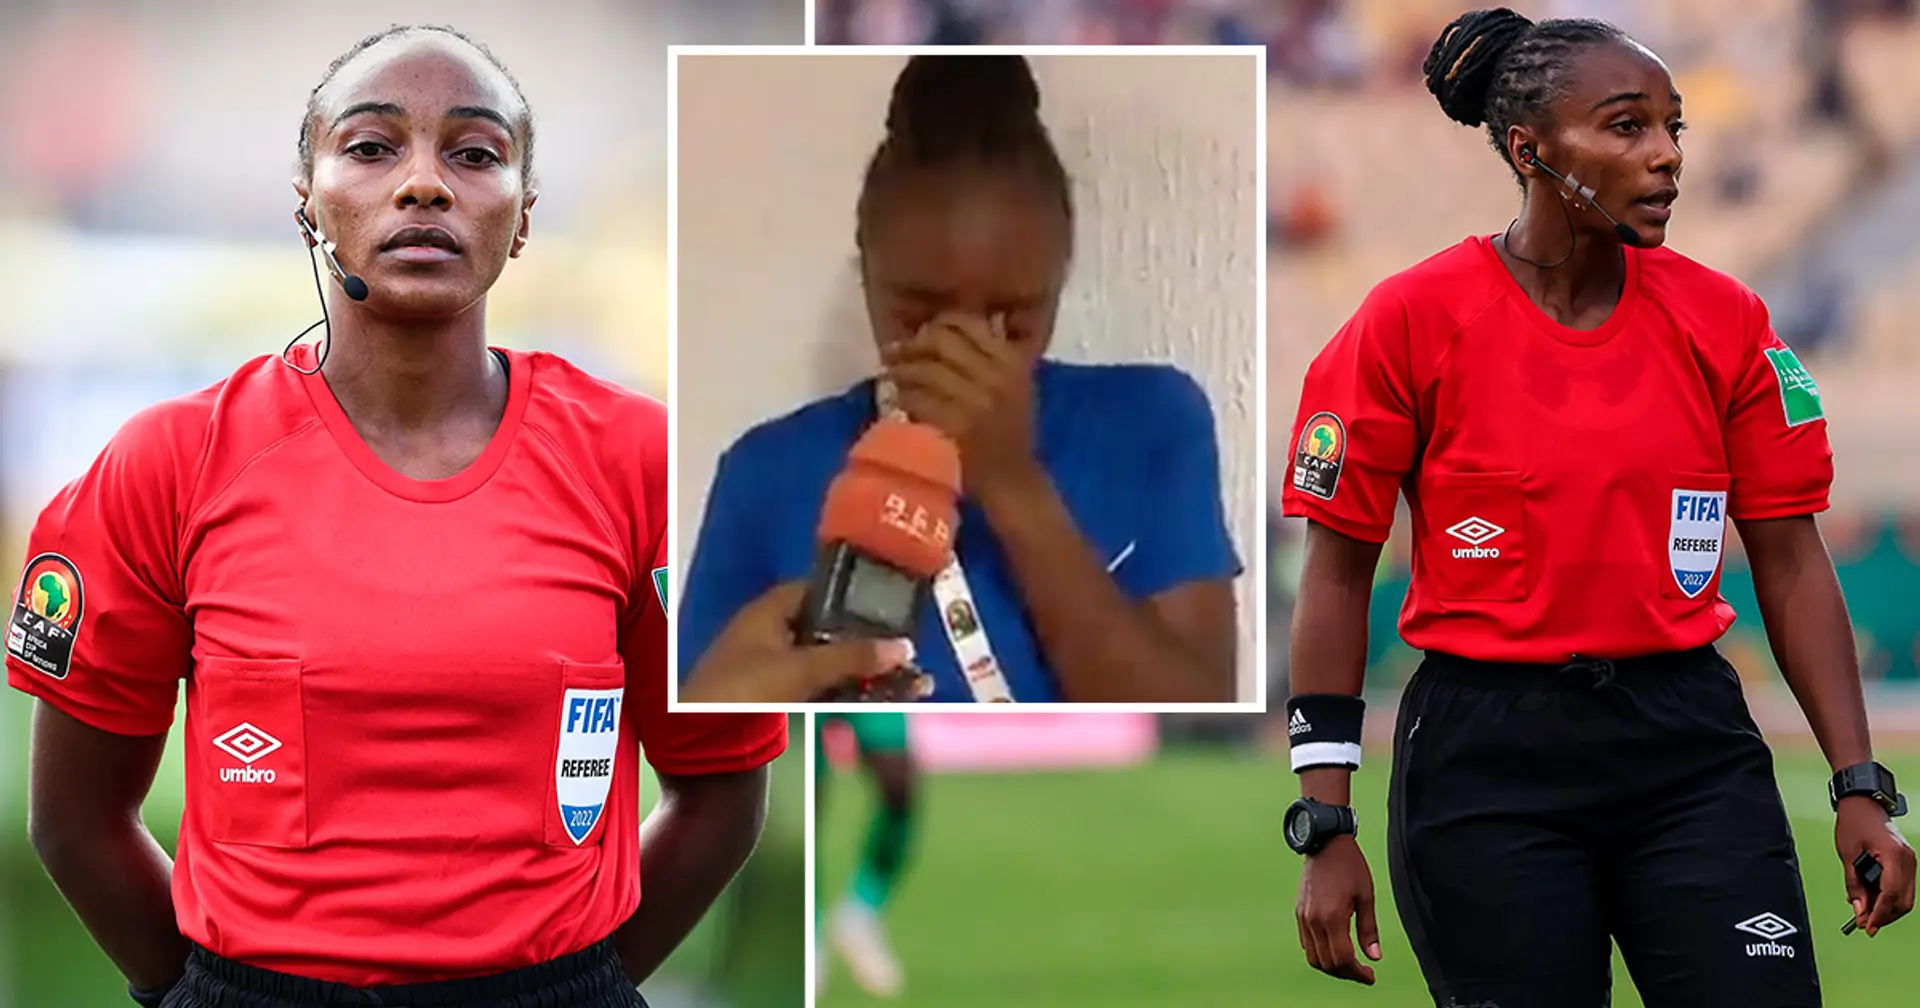 Rwandan referee Salima Mukansanga breaks down in tears as she becomes first woman to officiate AFCON match